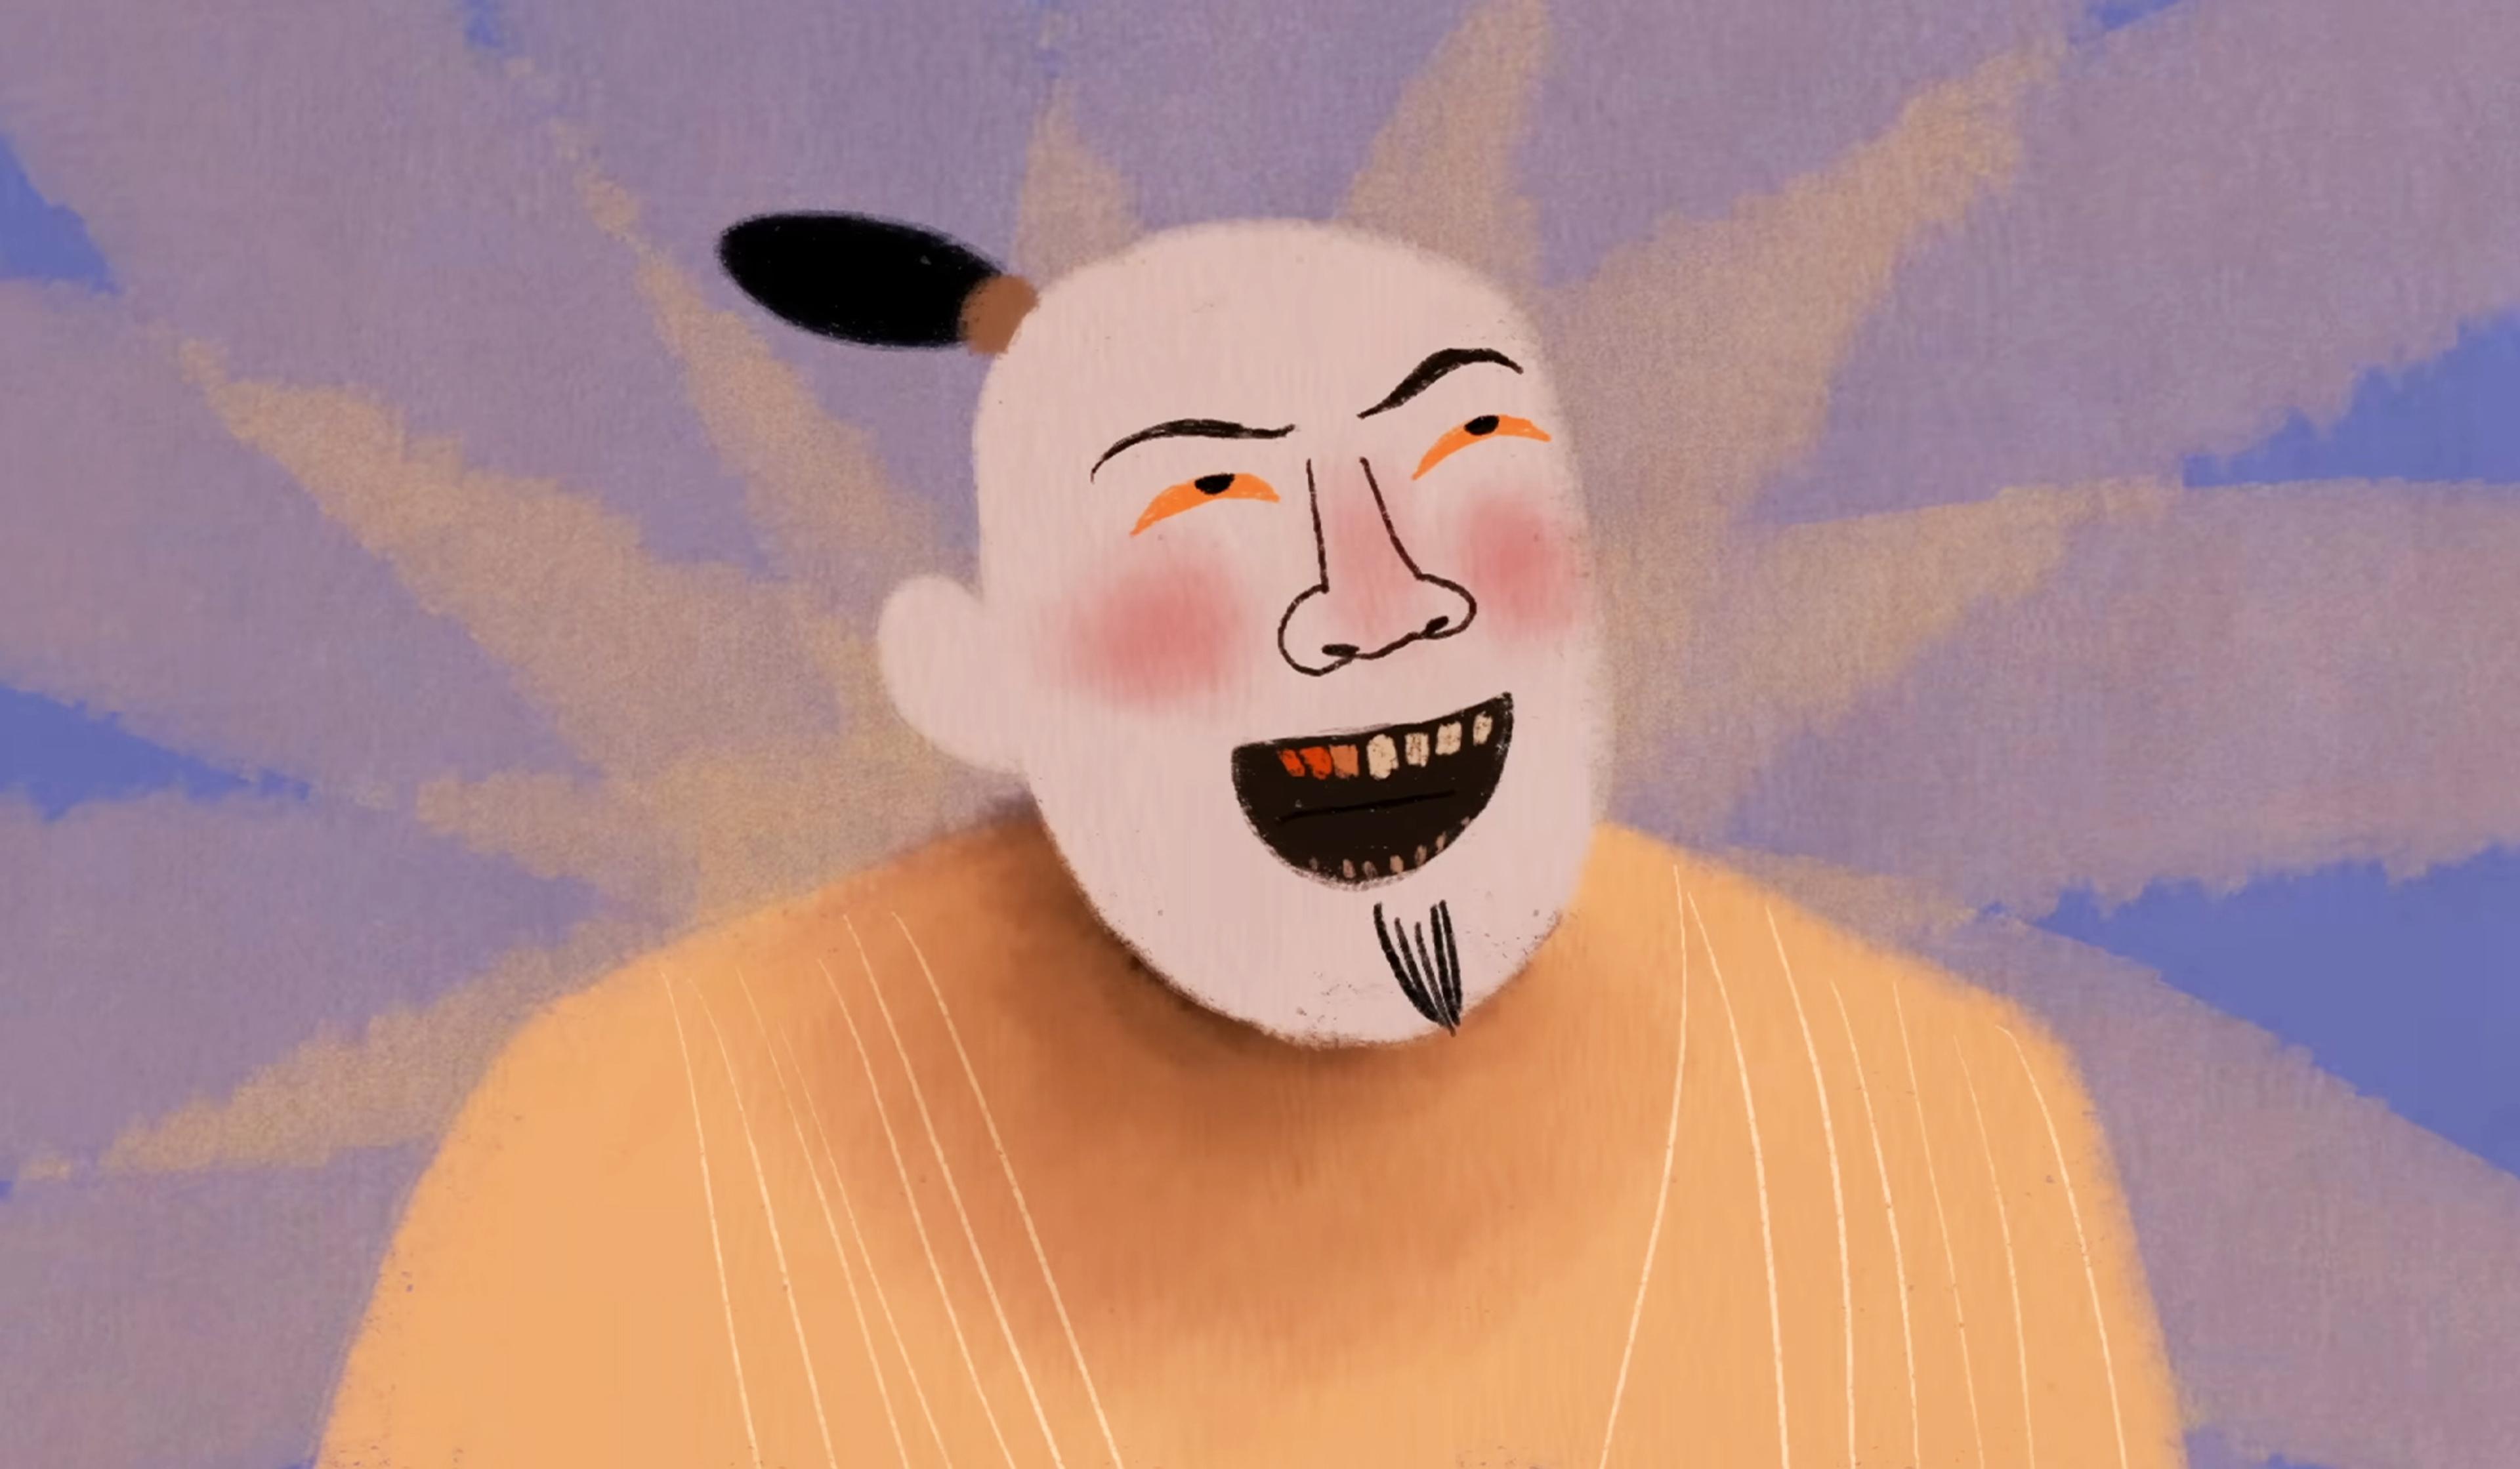 Illustration of a smiling figure with a topknot, red cheeks, and a small goatee. The background features abstract, pastel-blue and light-brown brush strokes.